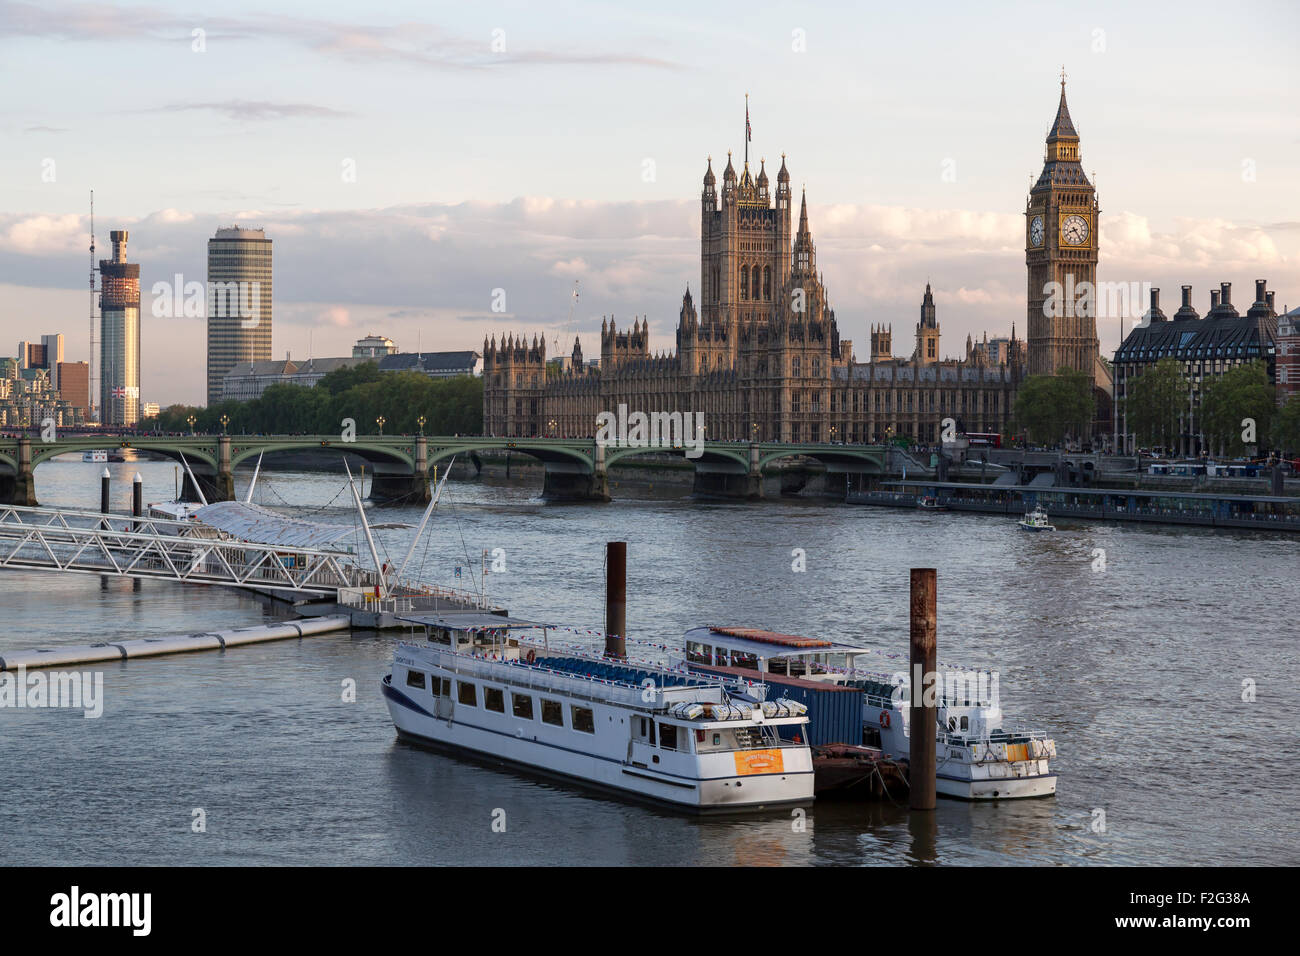 04.06.2012, London, Greater London, United Kingdom - Looking over the River Thames towards the City of Westminster to the Stock Photo